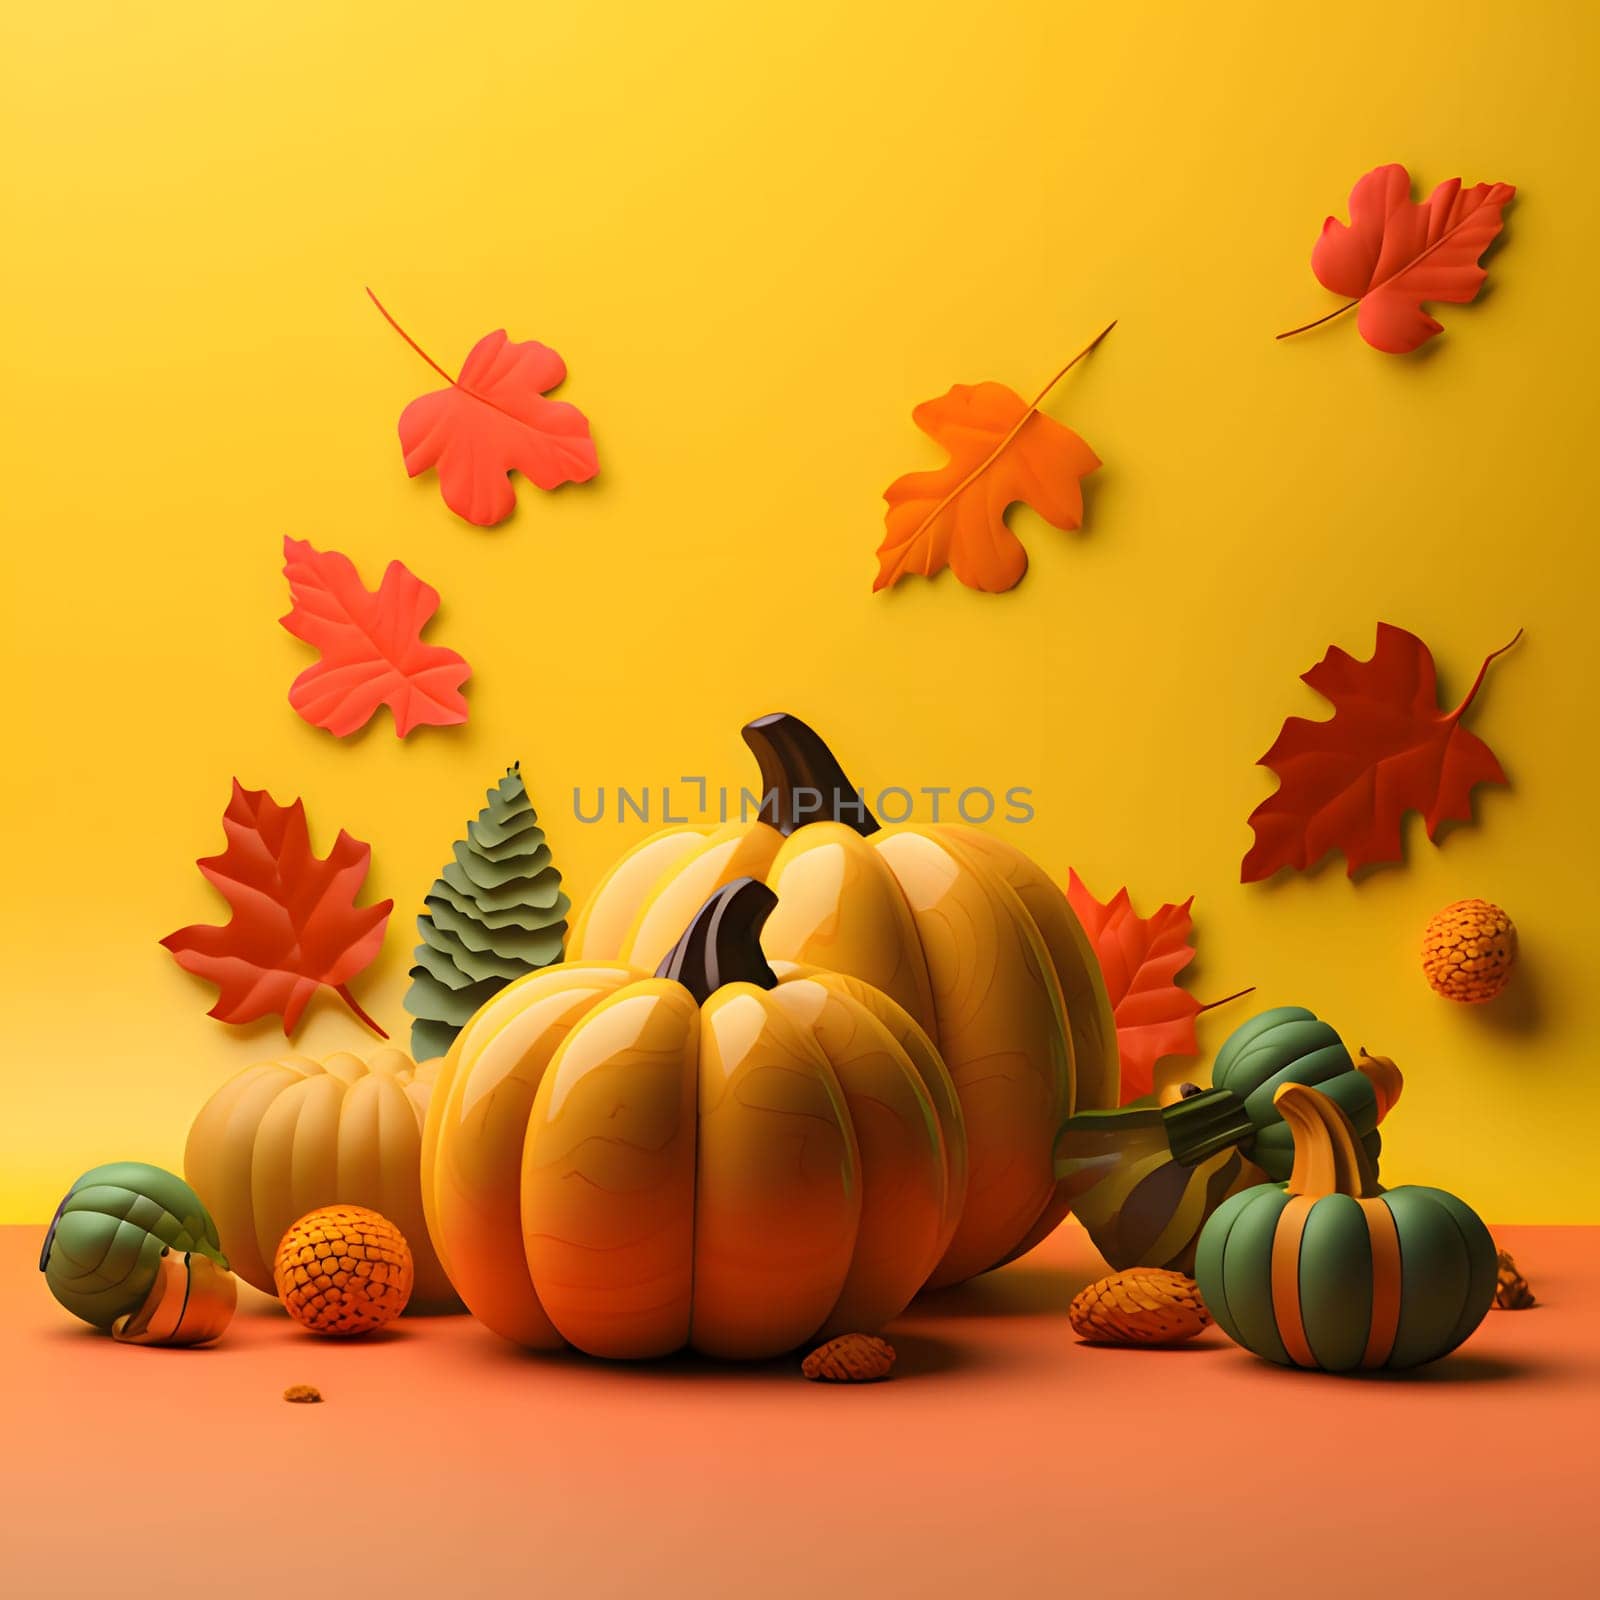 Pumpkins on a yellow background with stuck leaves. Pumpkin as a dish of thanksgiving for the harvest. by ThemesS